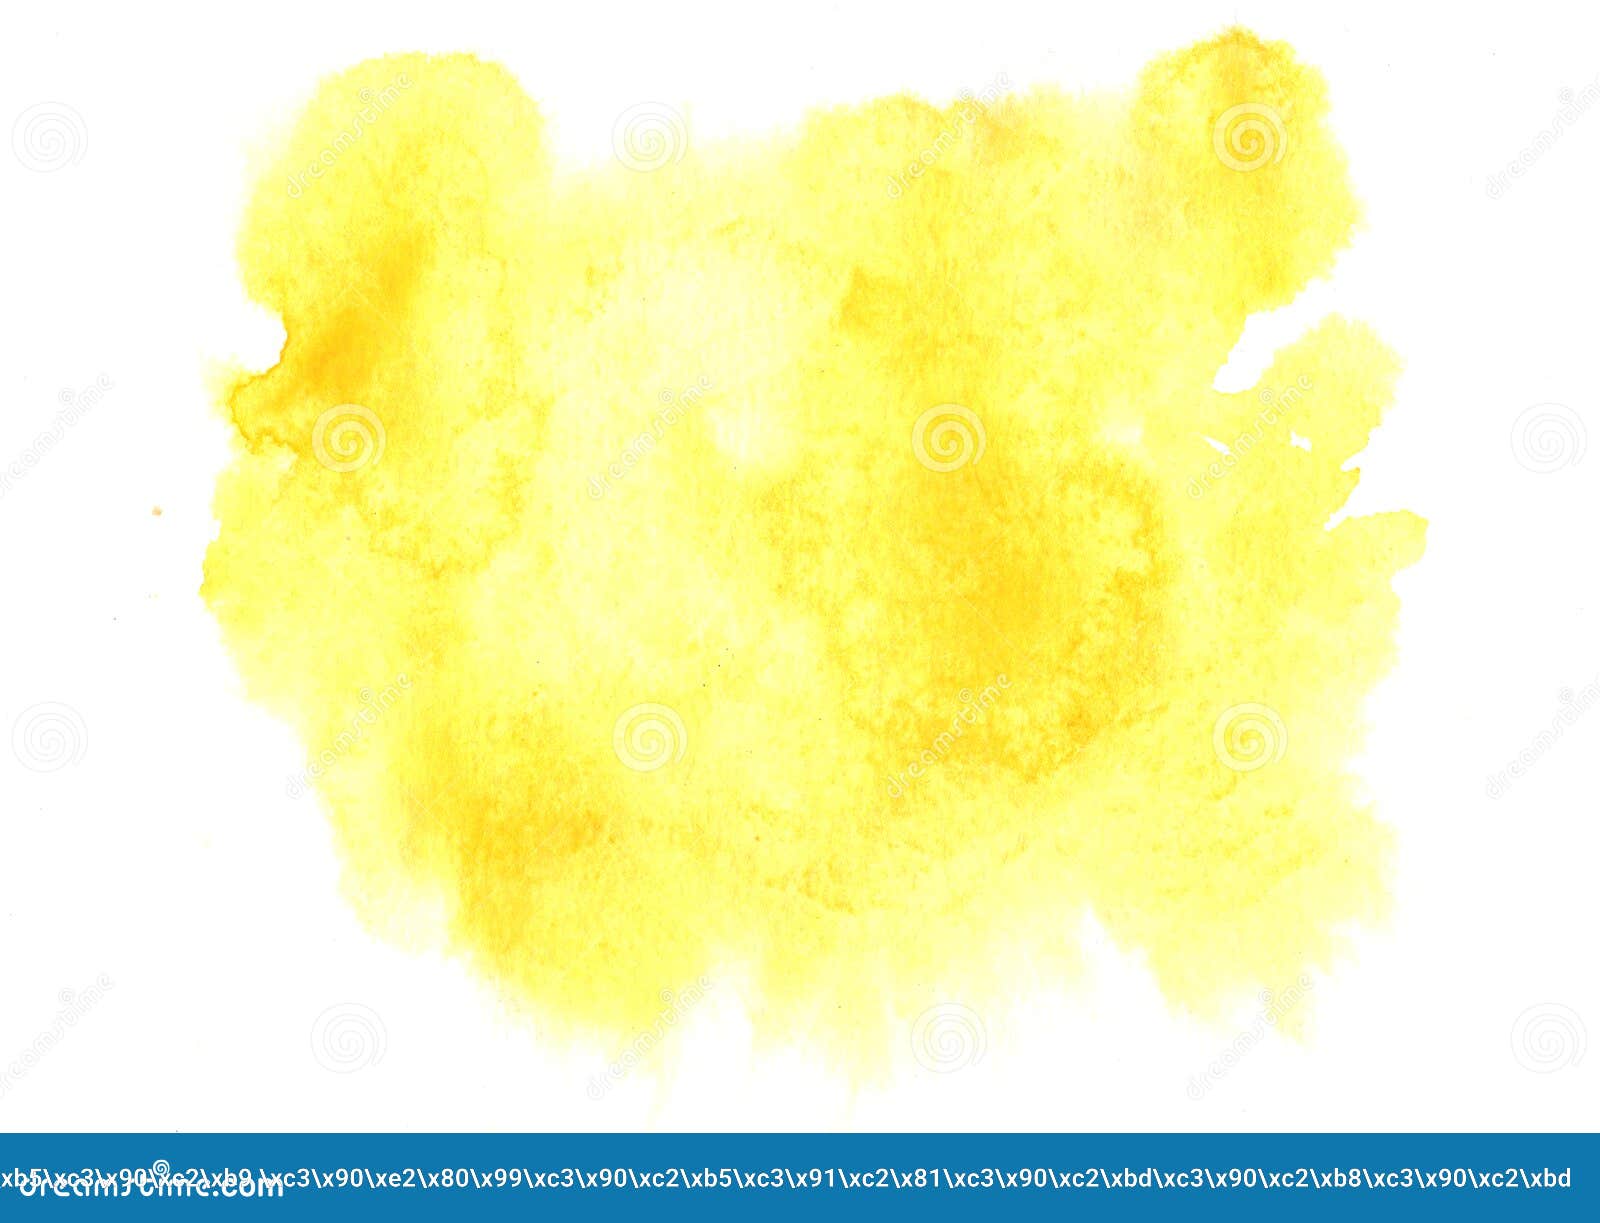 Modern Abstract Yellow Background for Design, Text and Web. Template ...